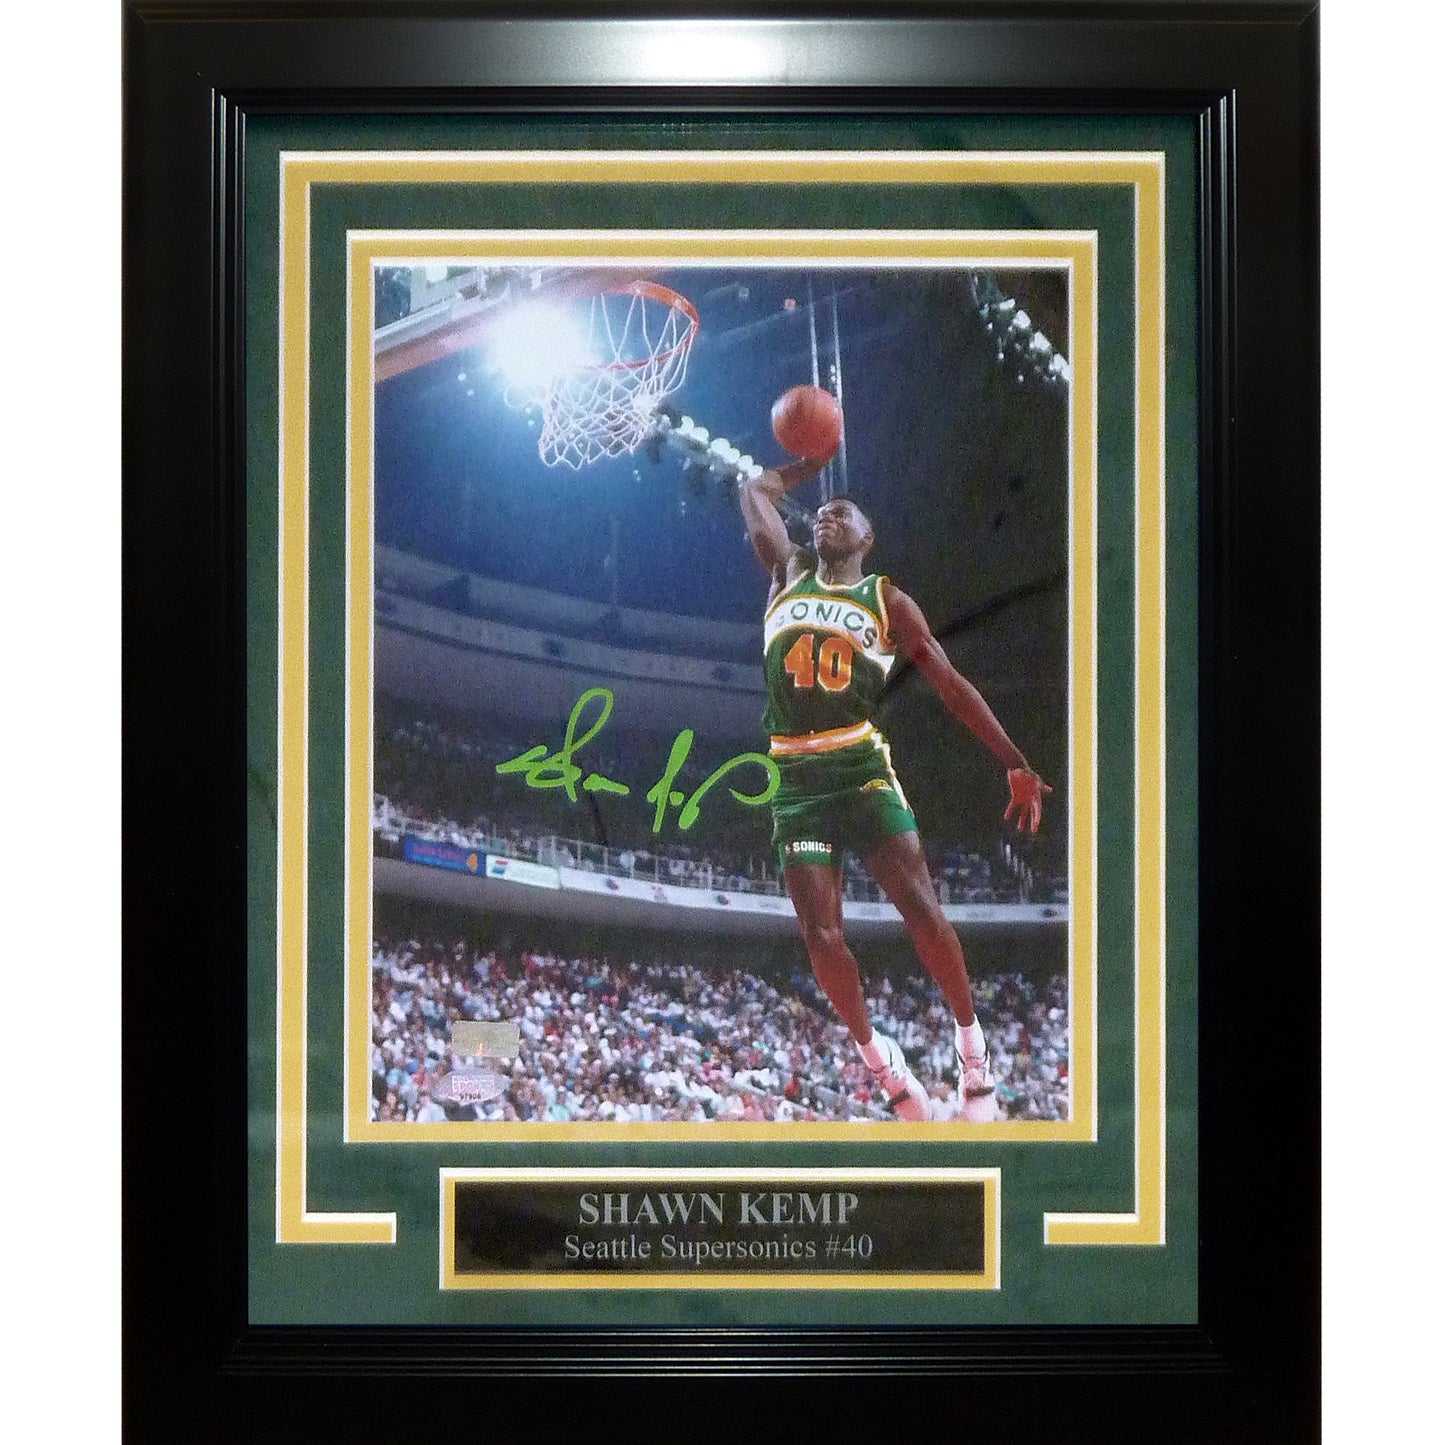 Shawn Kemp Autographed Seattle Supersonics (Slam Dunk) Deluxe Framed 8x10 Photo – MCS